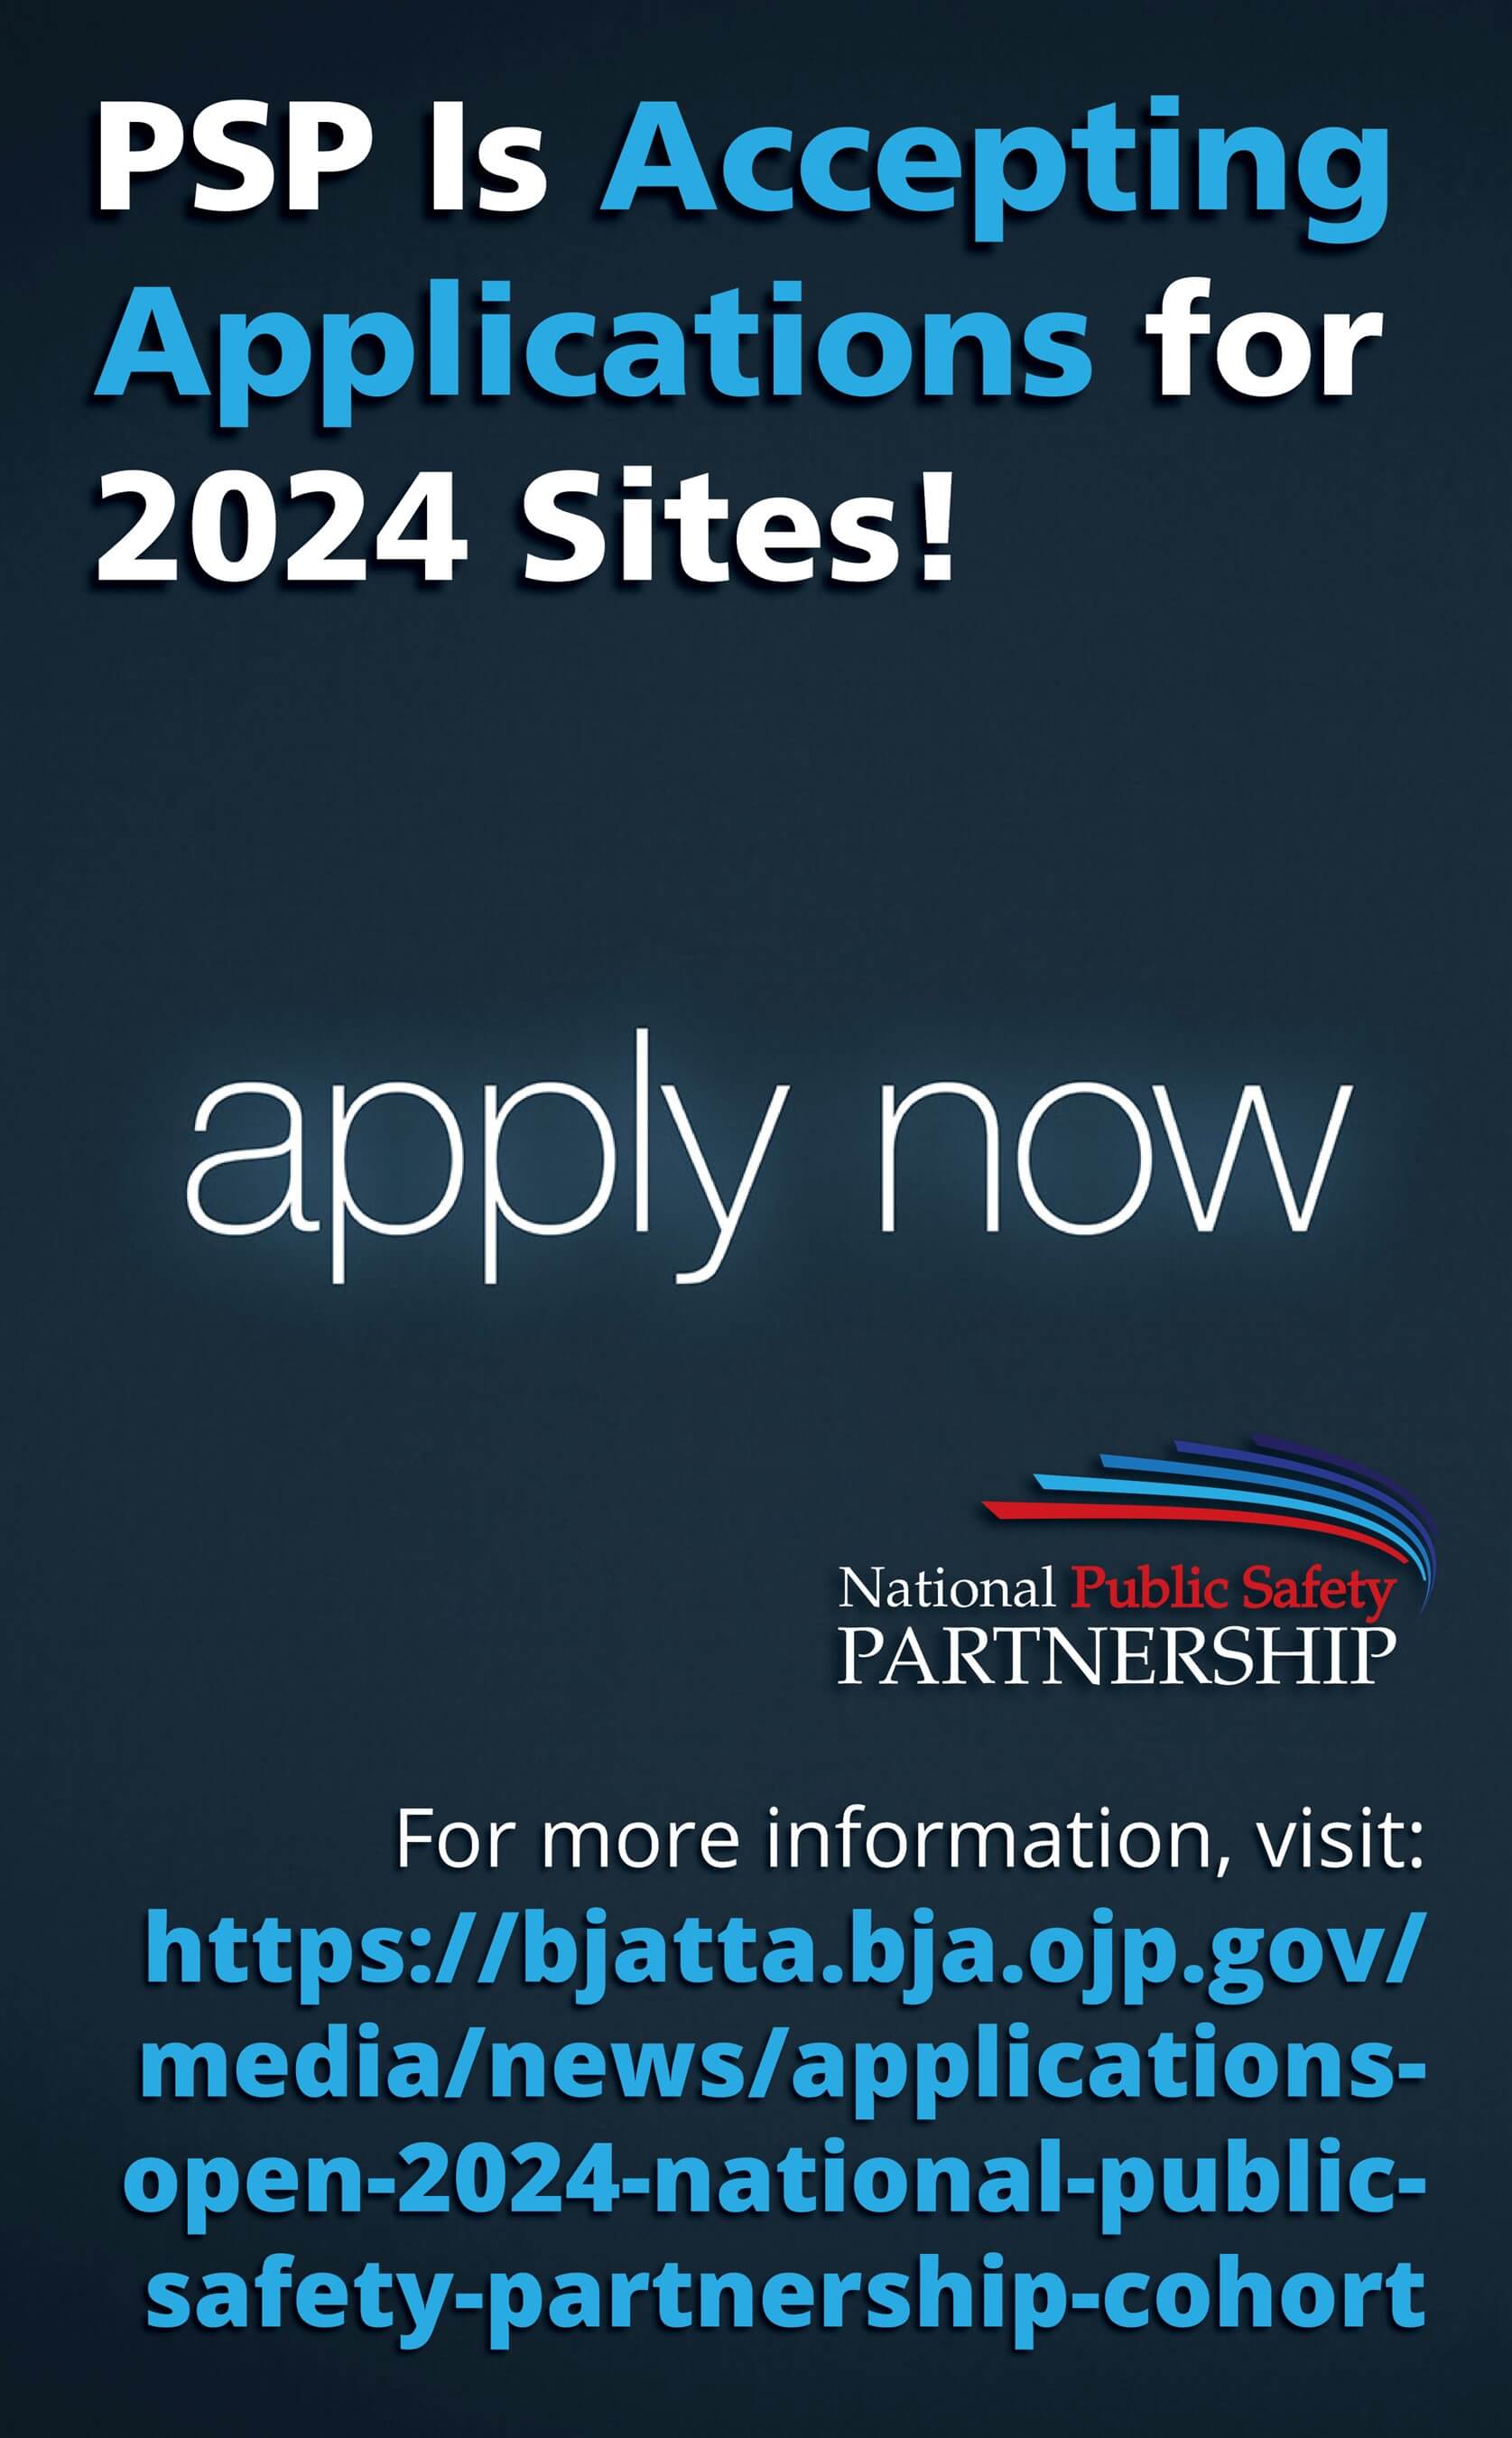 PSP is accepting applications for 2024 sites. Apply now.